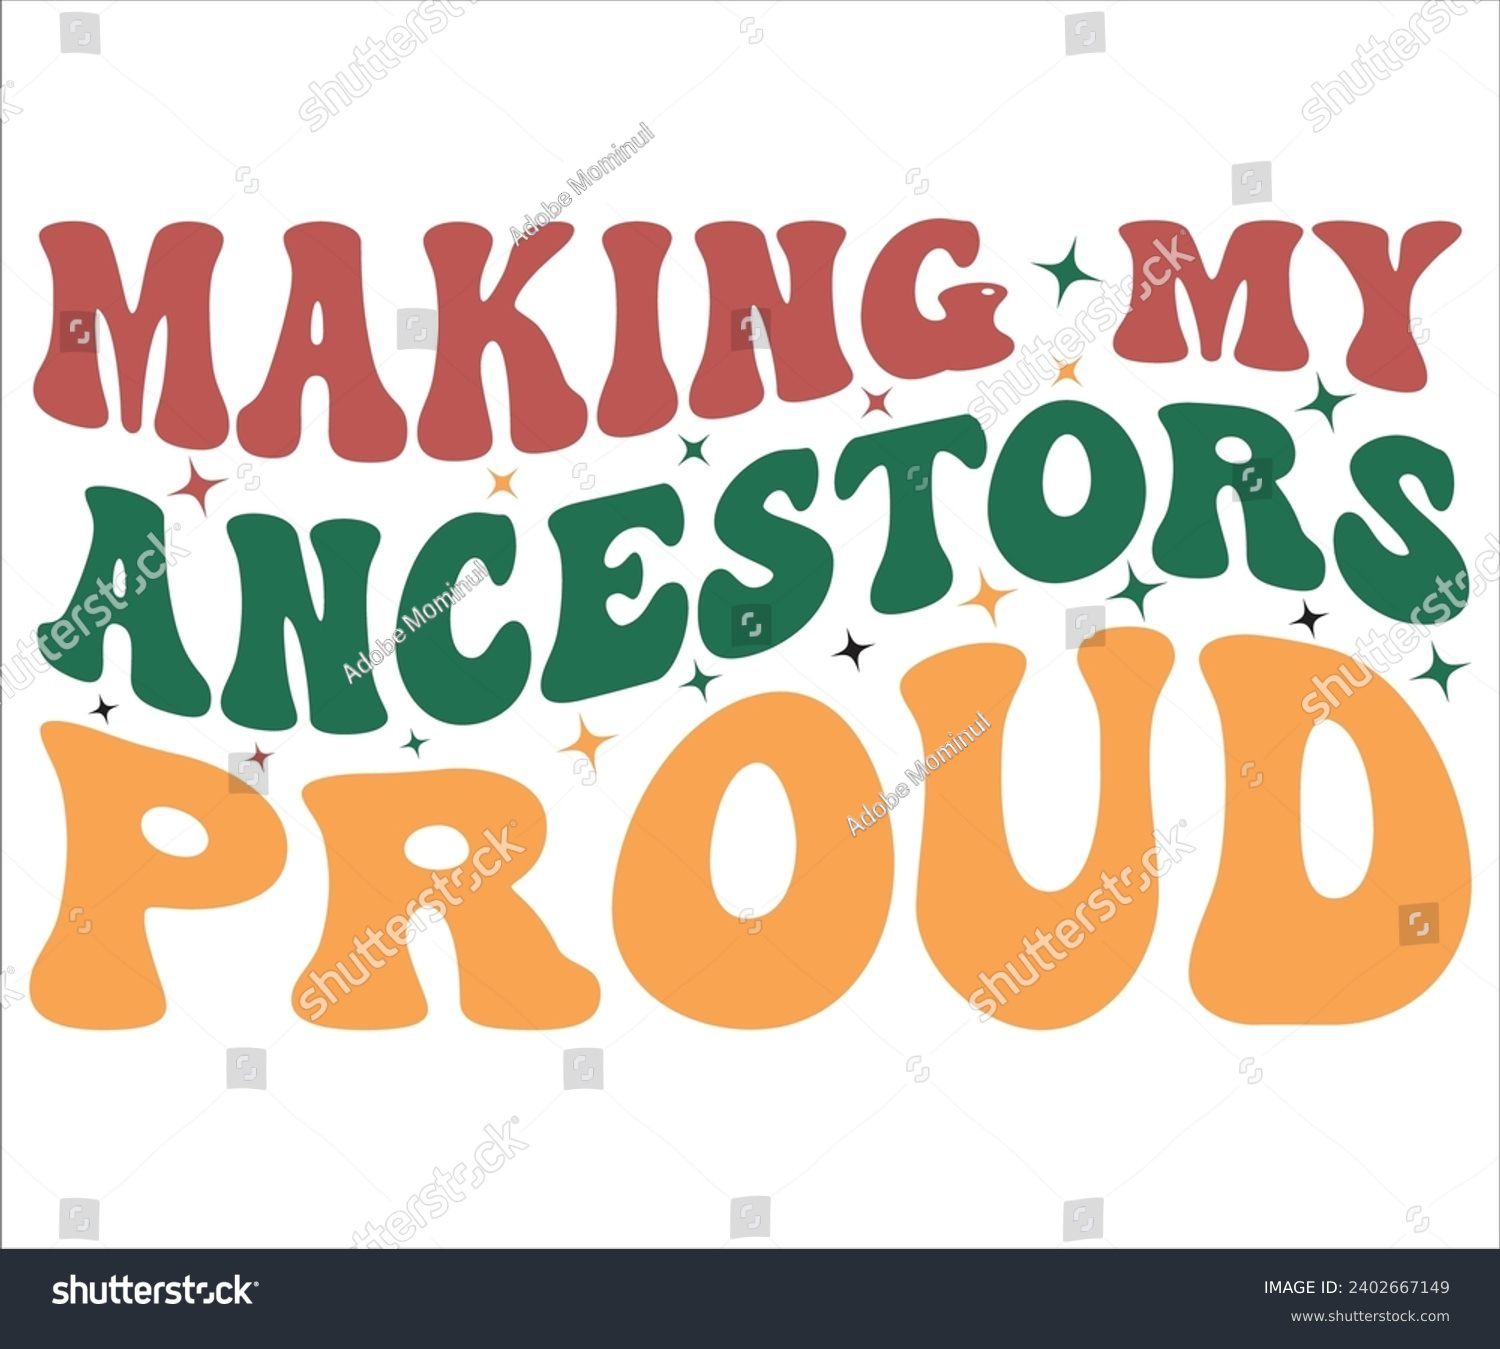 SVG of Making My Ancestors Proud Svg,Black History Month Svg,Retro,Juneteenth Svg,Black History Quotes,Black People Afro American T shirt,BLM Svg,Black Men Woman,In February in United States and Canada svg